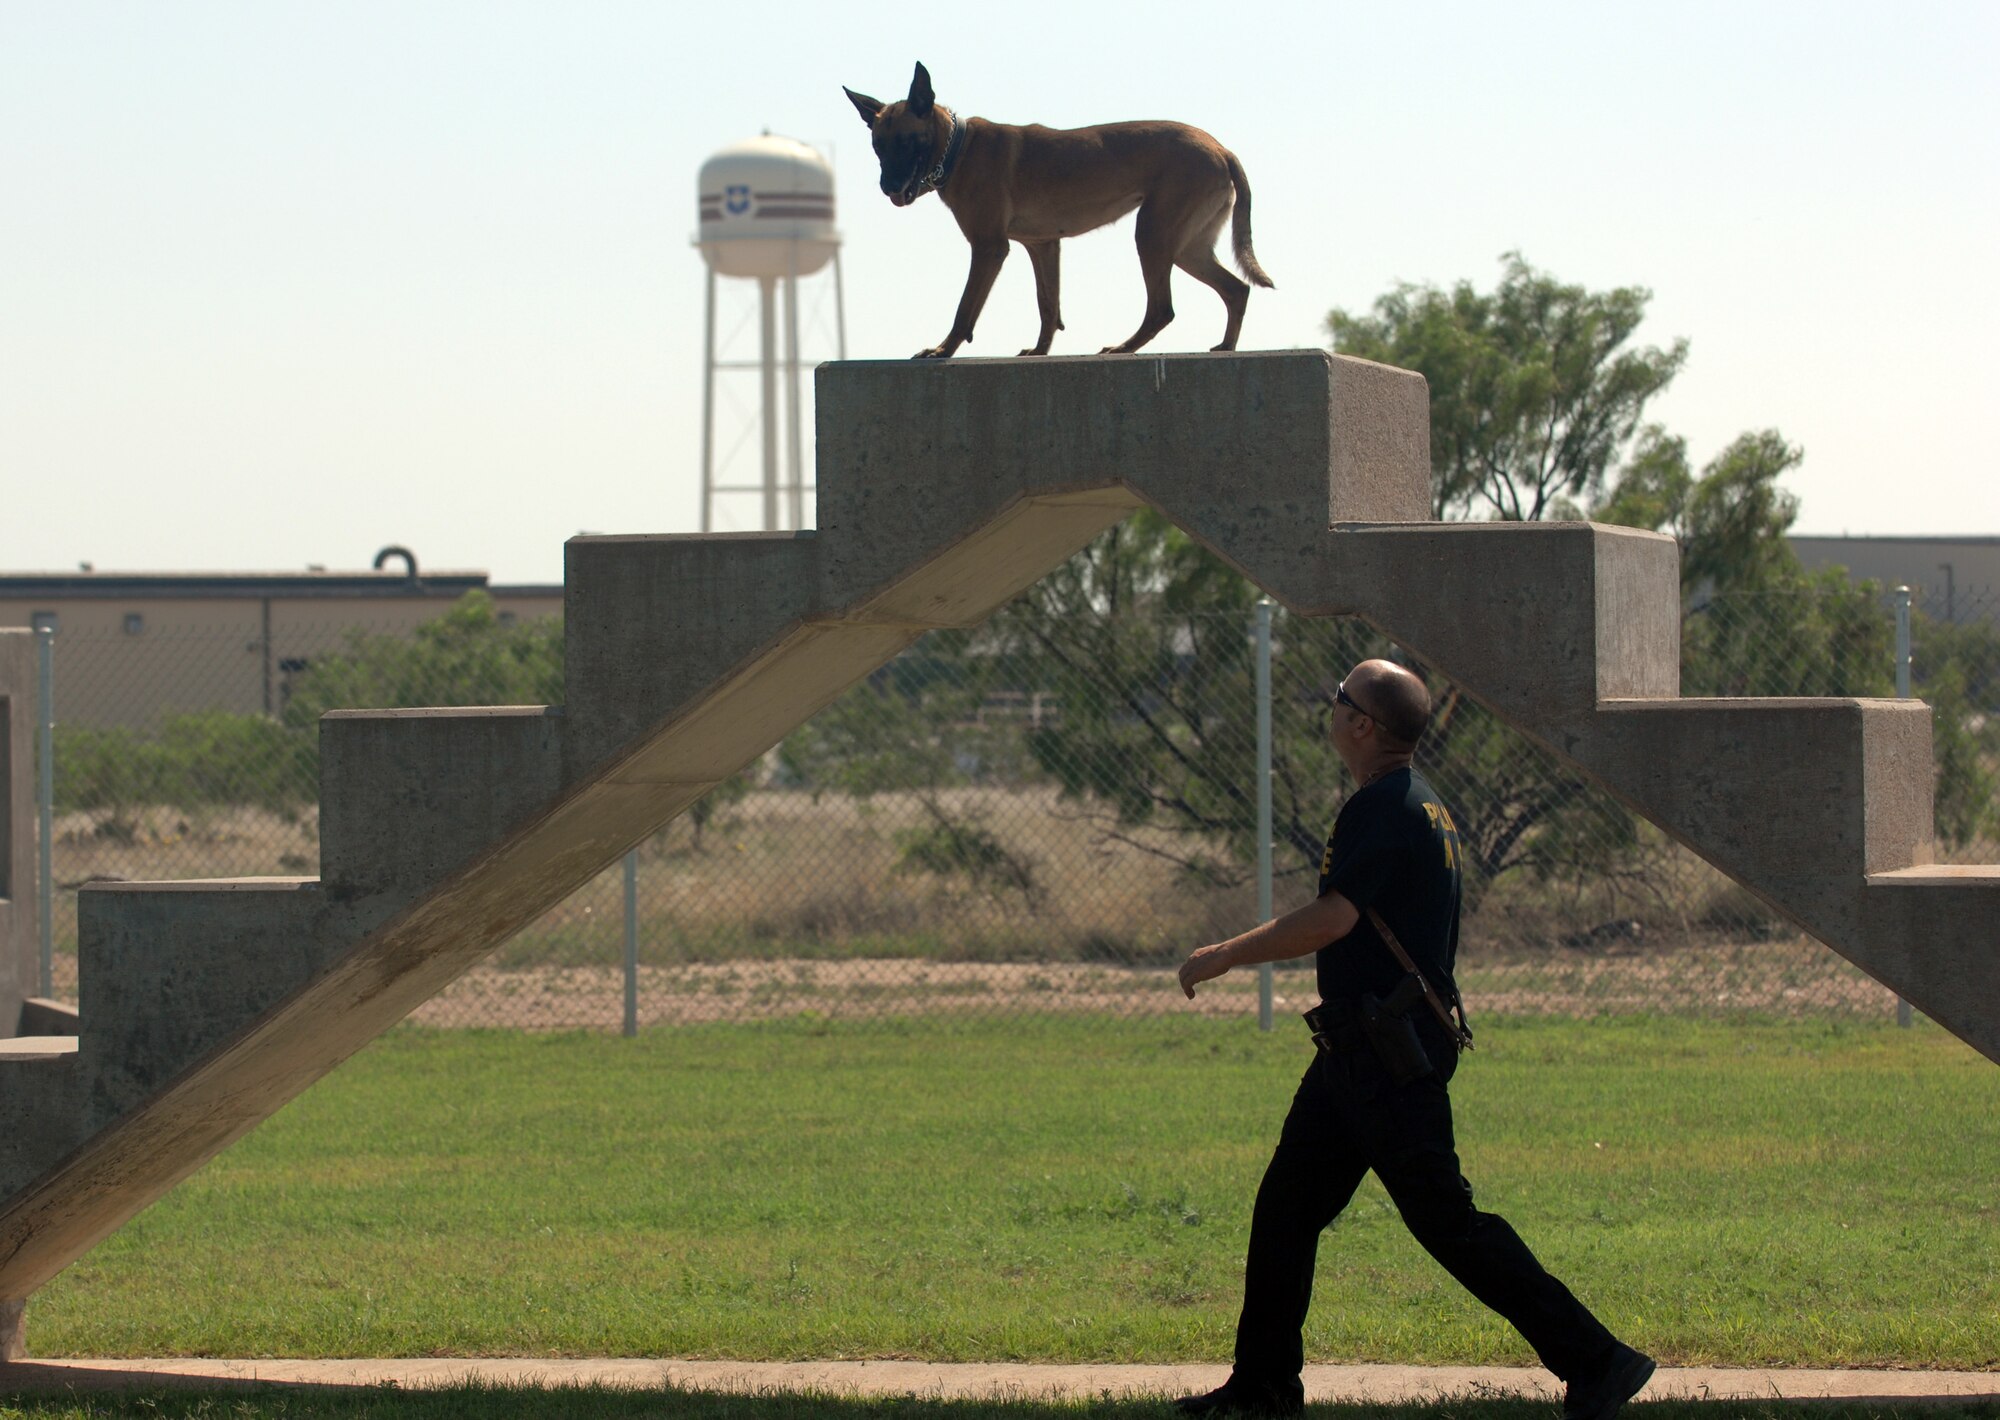 On top of a staircase obstacle during the K-9 competition is San Angelo Police Department K-9 Pepper, closely watched by her handler, Police Sgt. David Egger. Sergeant Egger and Pepper placed first in the Patrol Apprehension event of the K-9 competition. (U.S. Air Force photo by Tech. Sgt. John Barton)